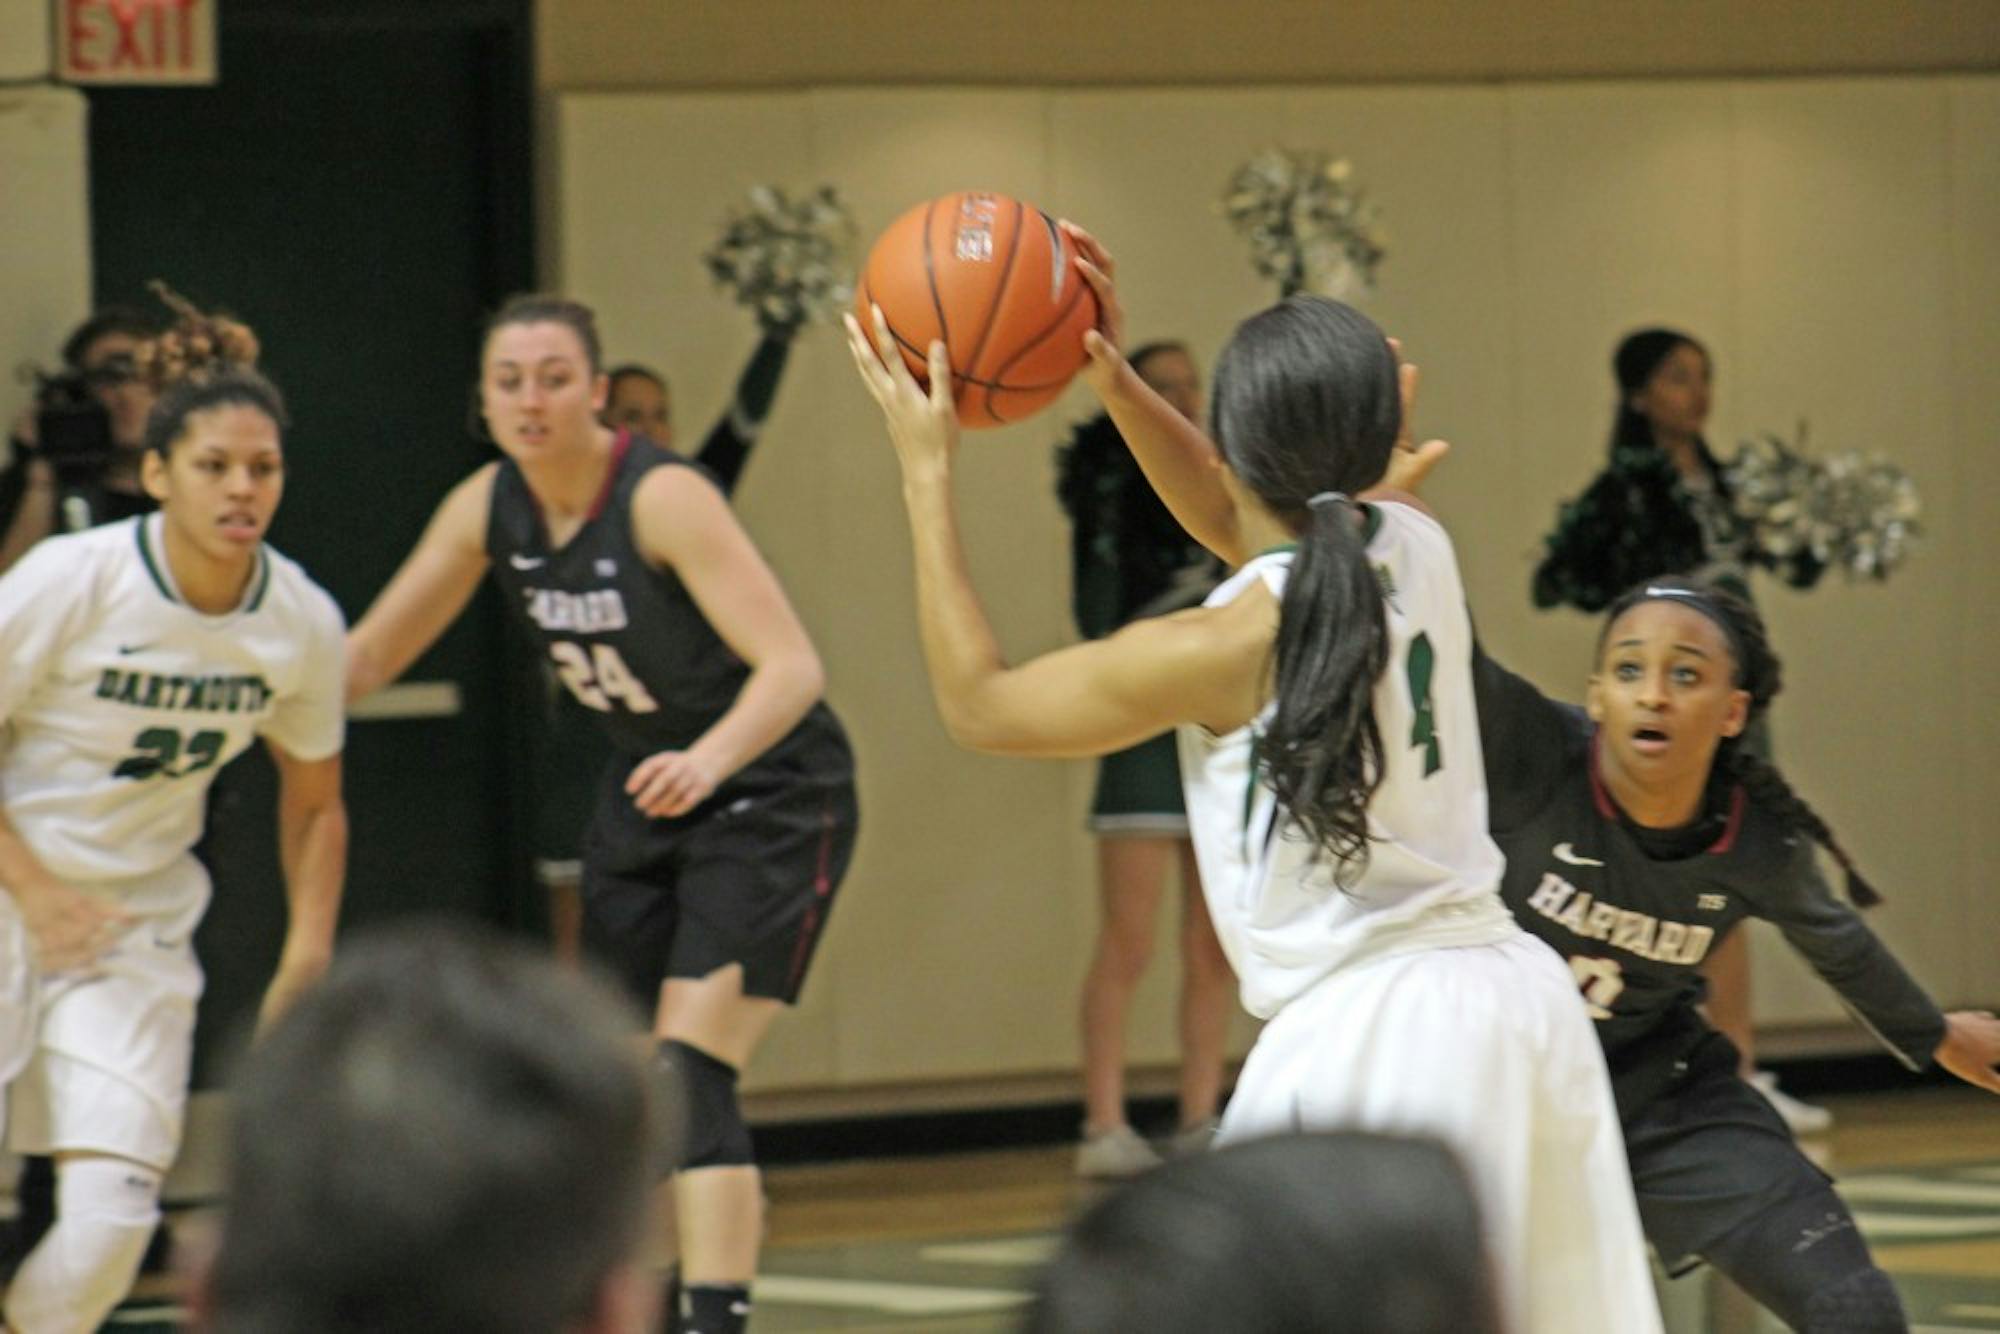 The women's basketball team won against Brown University before losing a close game to Yale University.